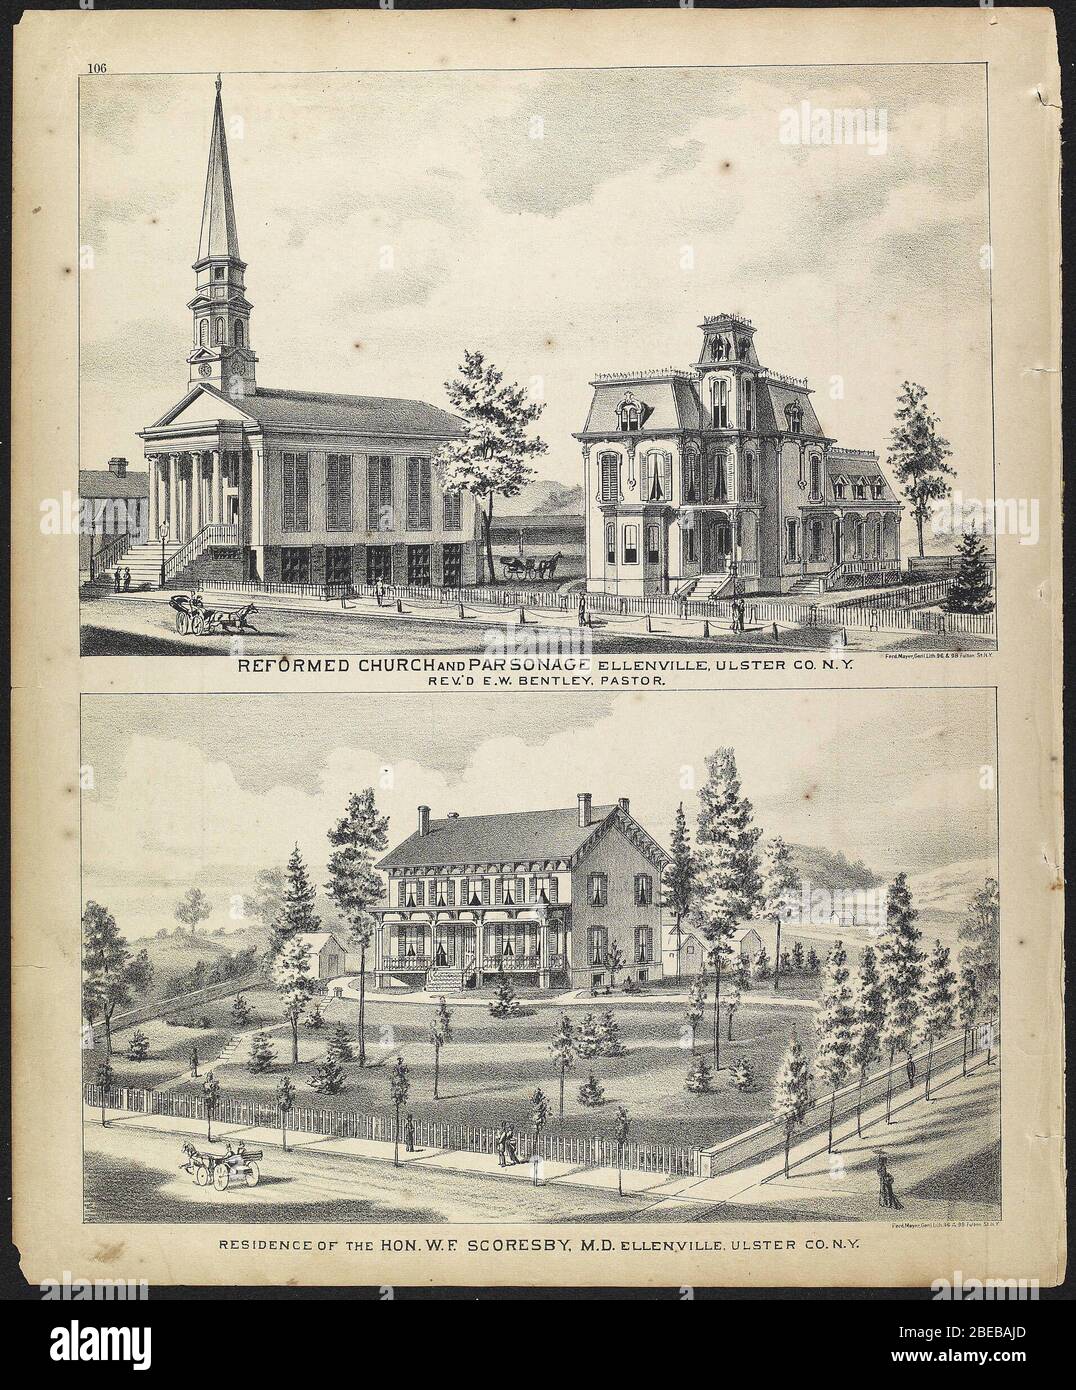 'Reformed Church and Parsonage Ellenville, Ulster Co. N.Y., Rev.’d E. W. Bentley, Pastor.  Residence of the Hon. W. F. Scoresby, M. D. Ellenville, Ulster Co. N.Y.; 1875; F. W. Beers: County Atlas of Ulster, New York, Walker & Jewett, New York 1875, p. 106 –  Haviland-Heidgerd Historical Collection at Hudson River Valley Heritage website; Frederick William Beers; ' Stock Photo